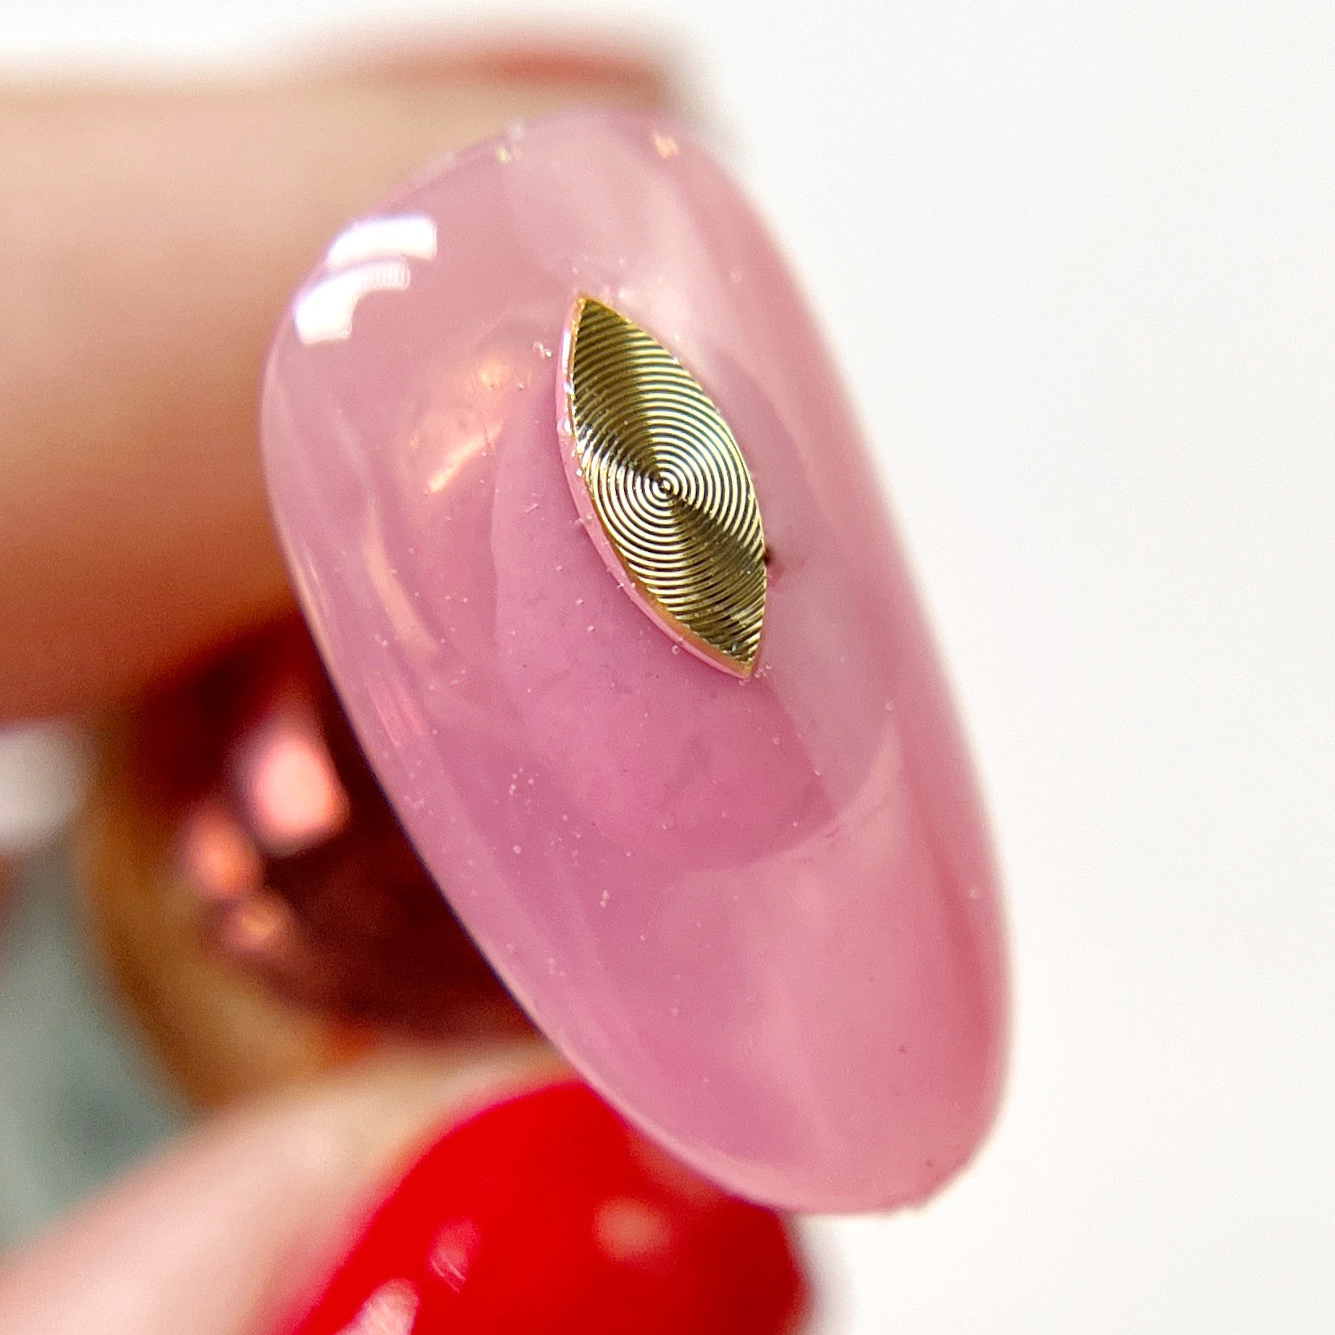 Hand holding decorated nail tip.